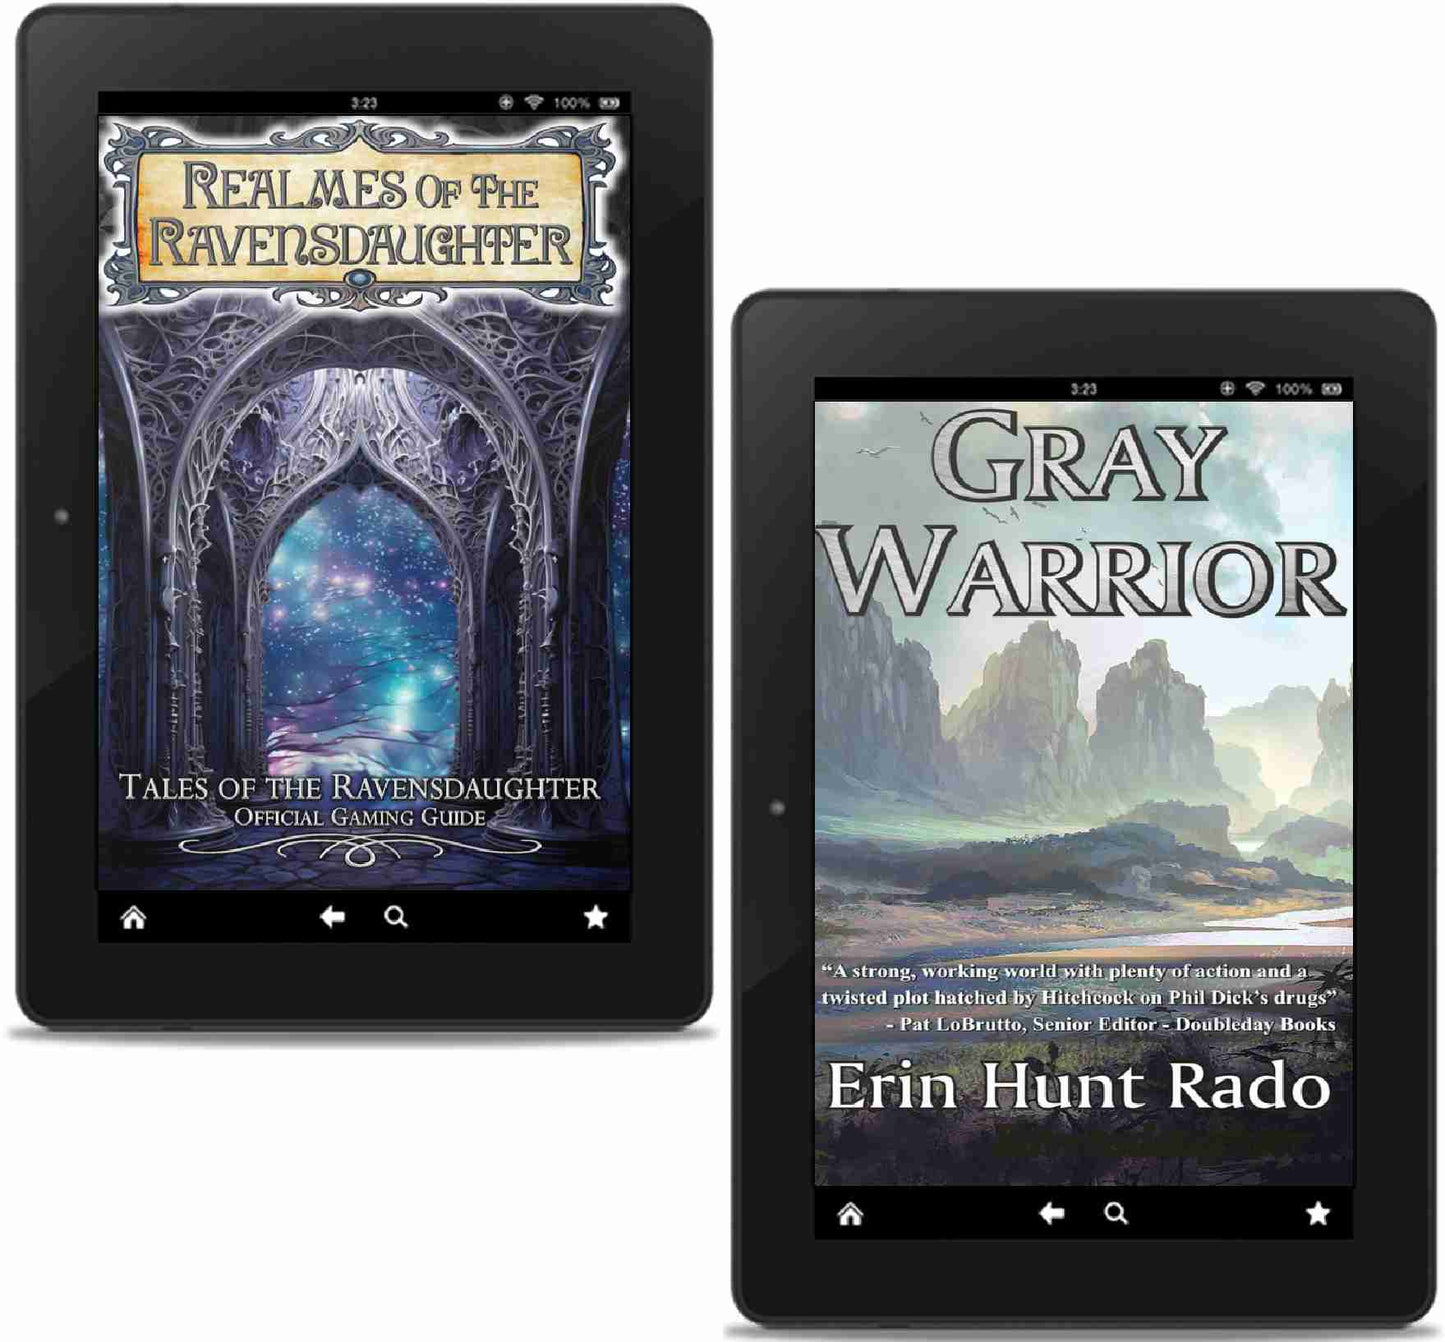 Realmes of the Ravensdaughter eBook PREORDER and Gray Warrior eBook